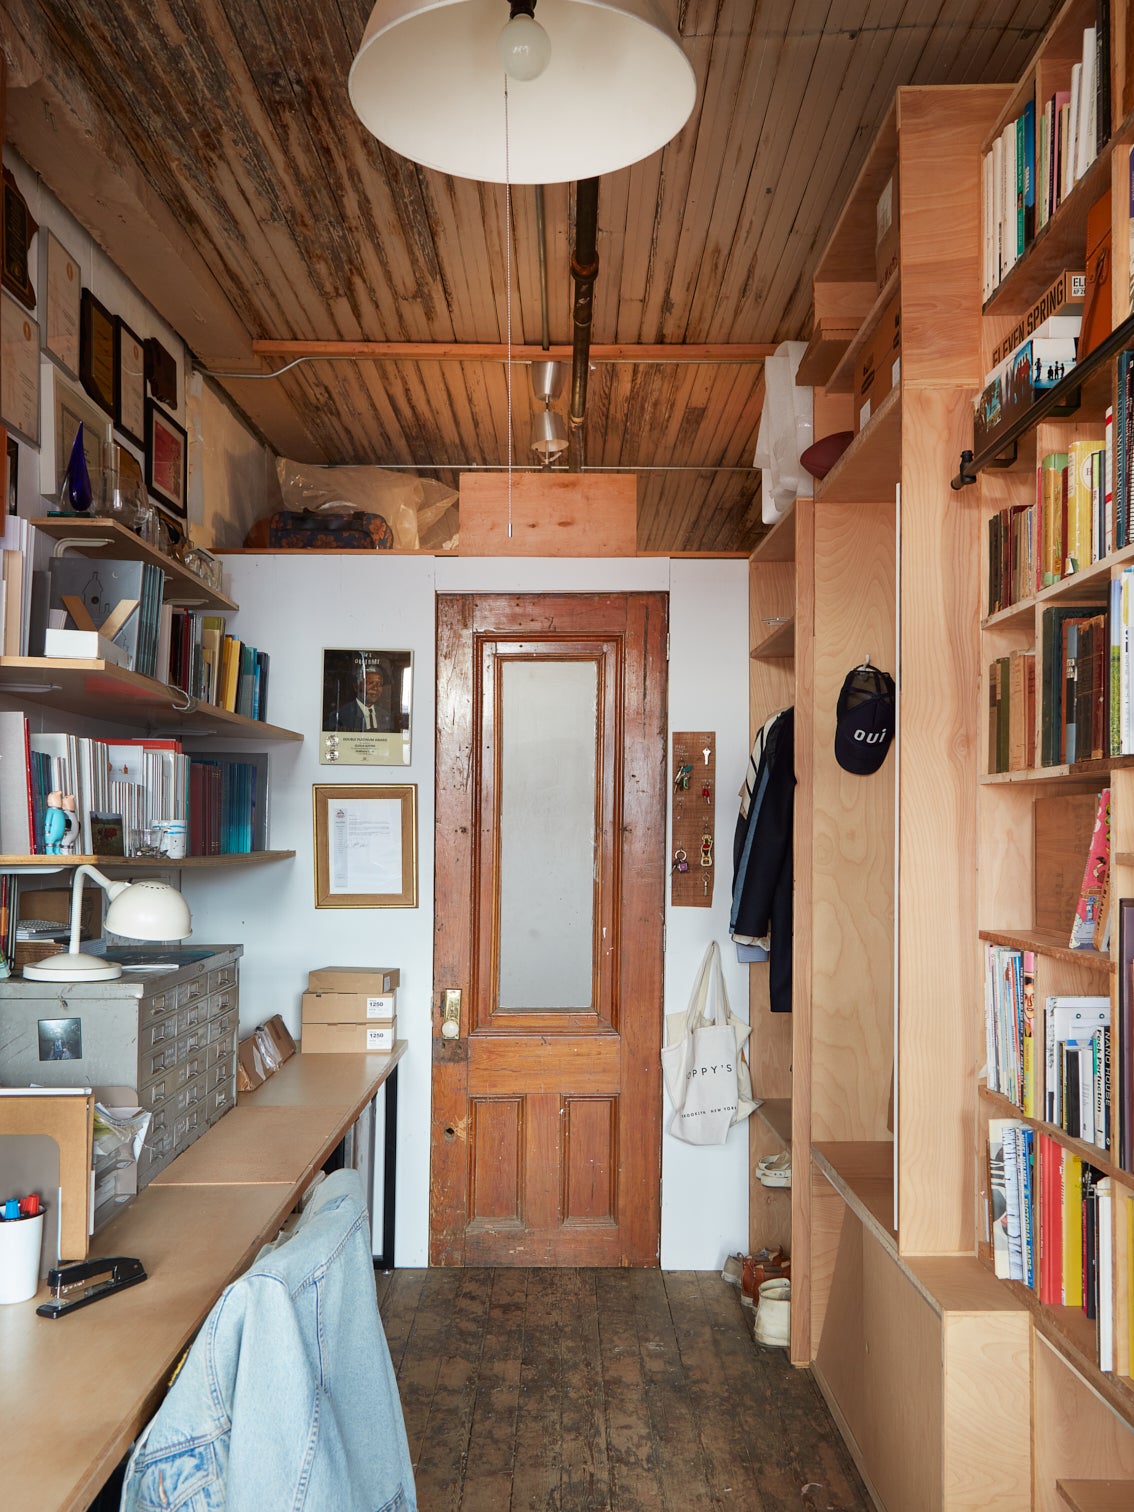 An hallway with wooden book shelves on both sides and a narrow wooden door at the end.